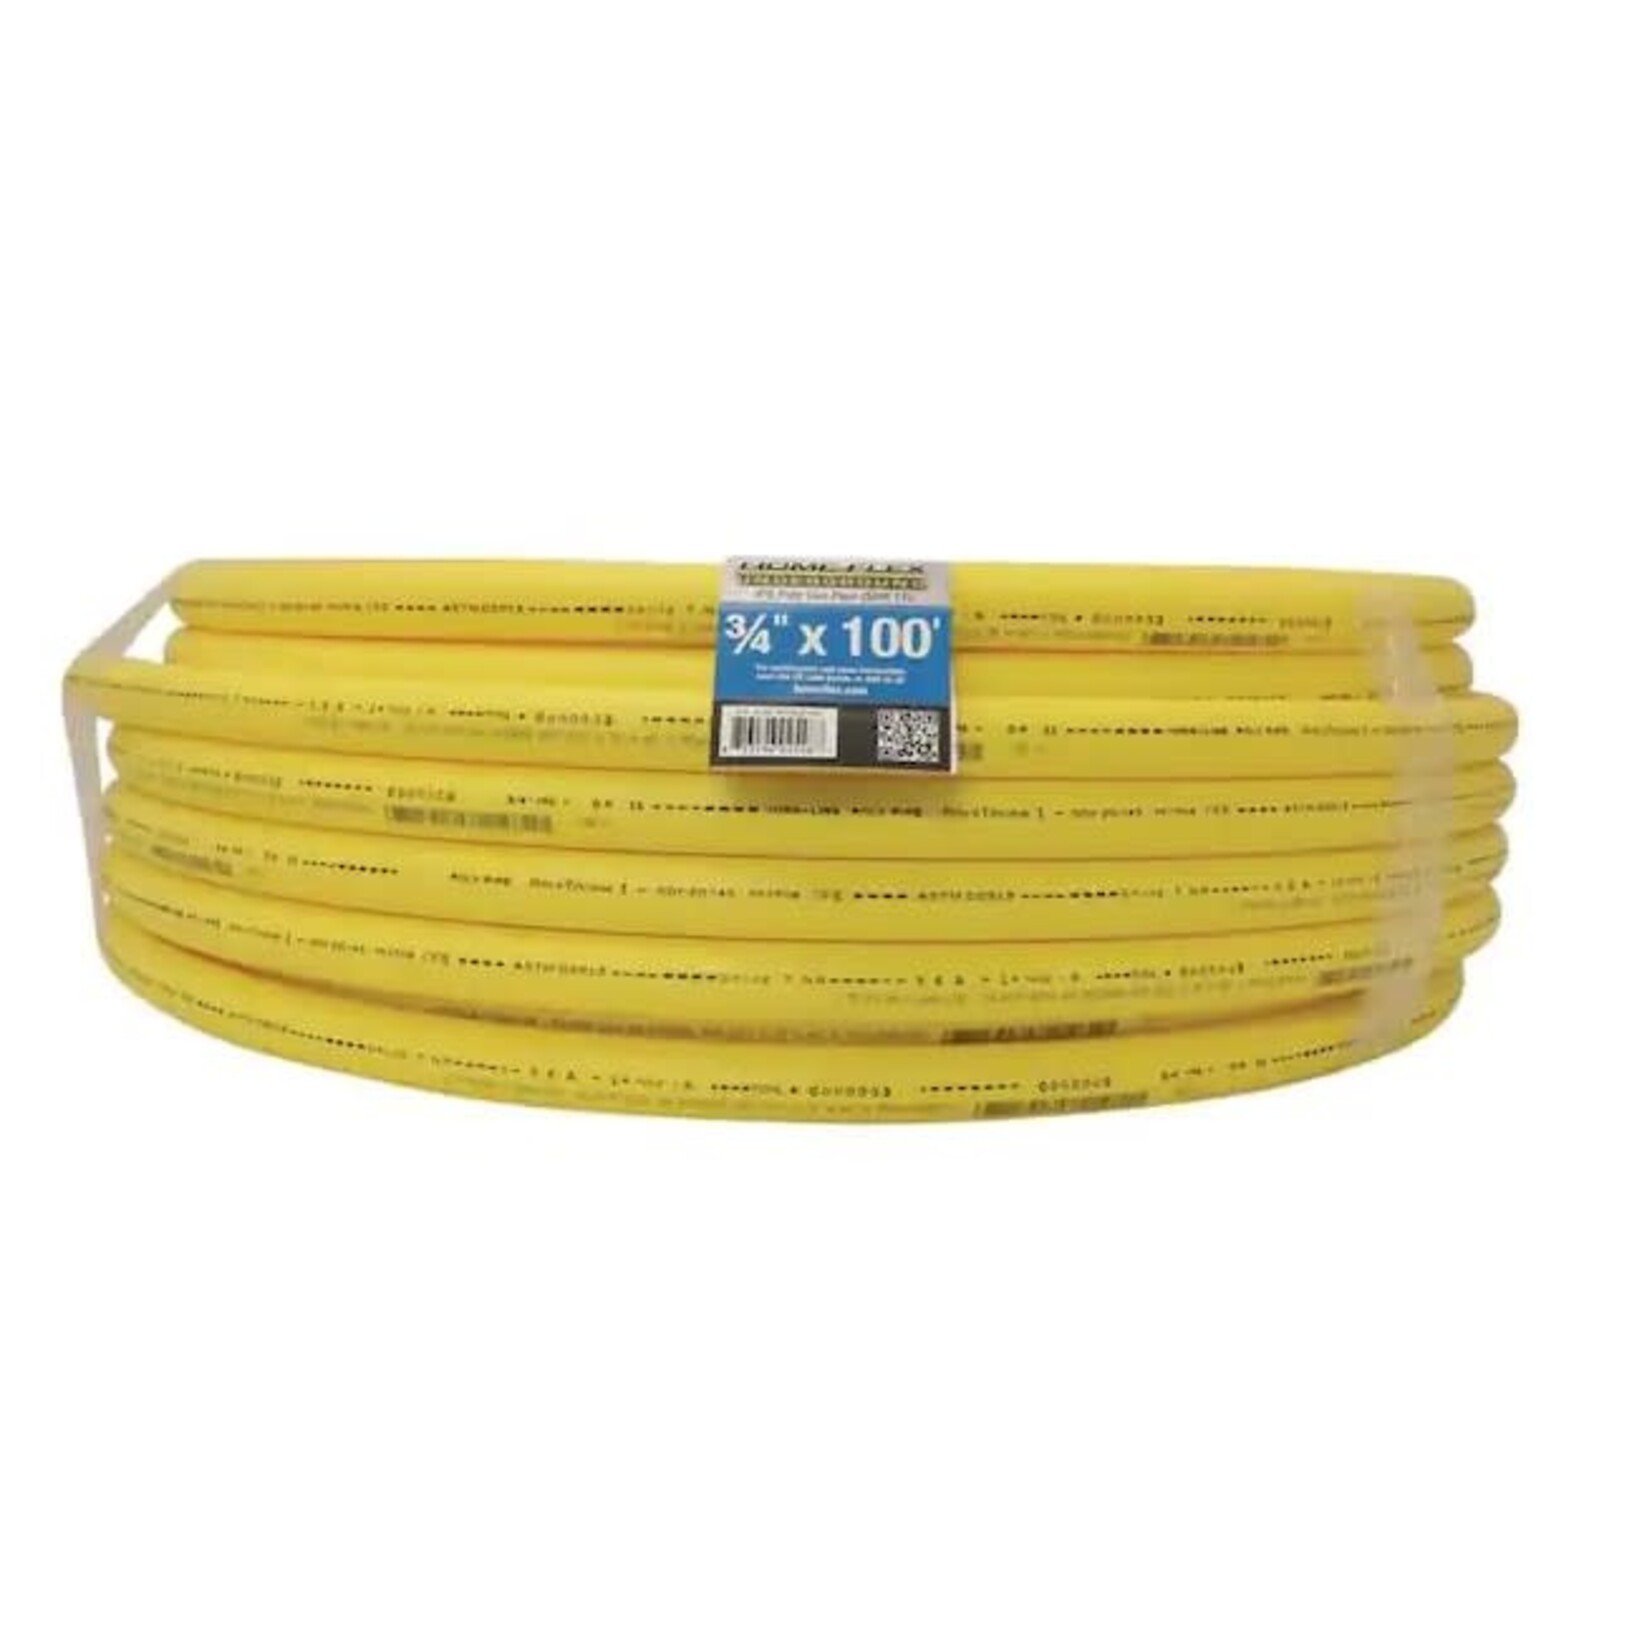 HOME-FLEX 3/4 IN X 100 FT YELLOW POLY GAS PIPE